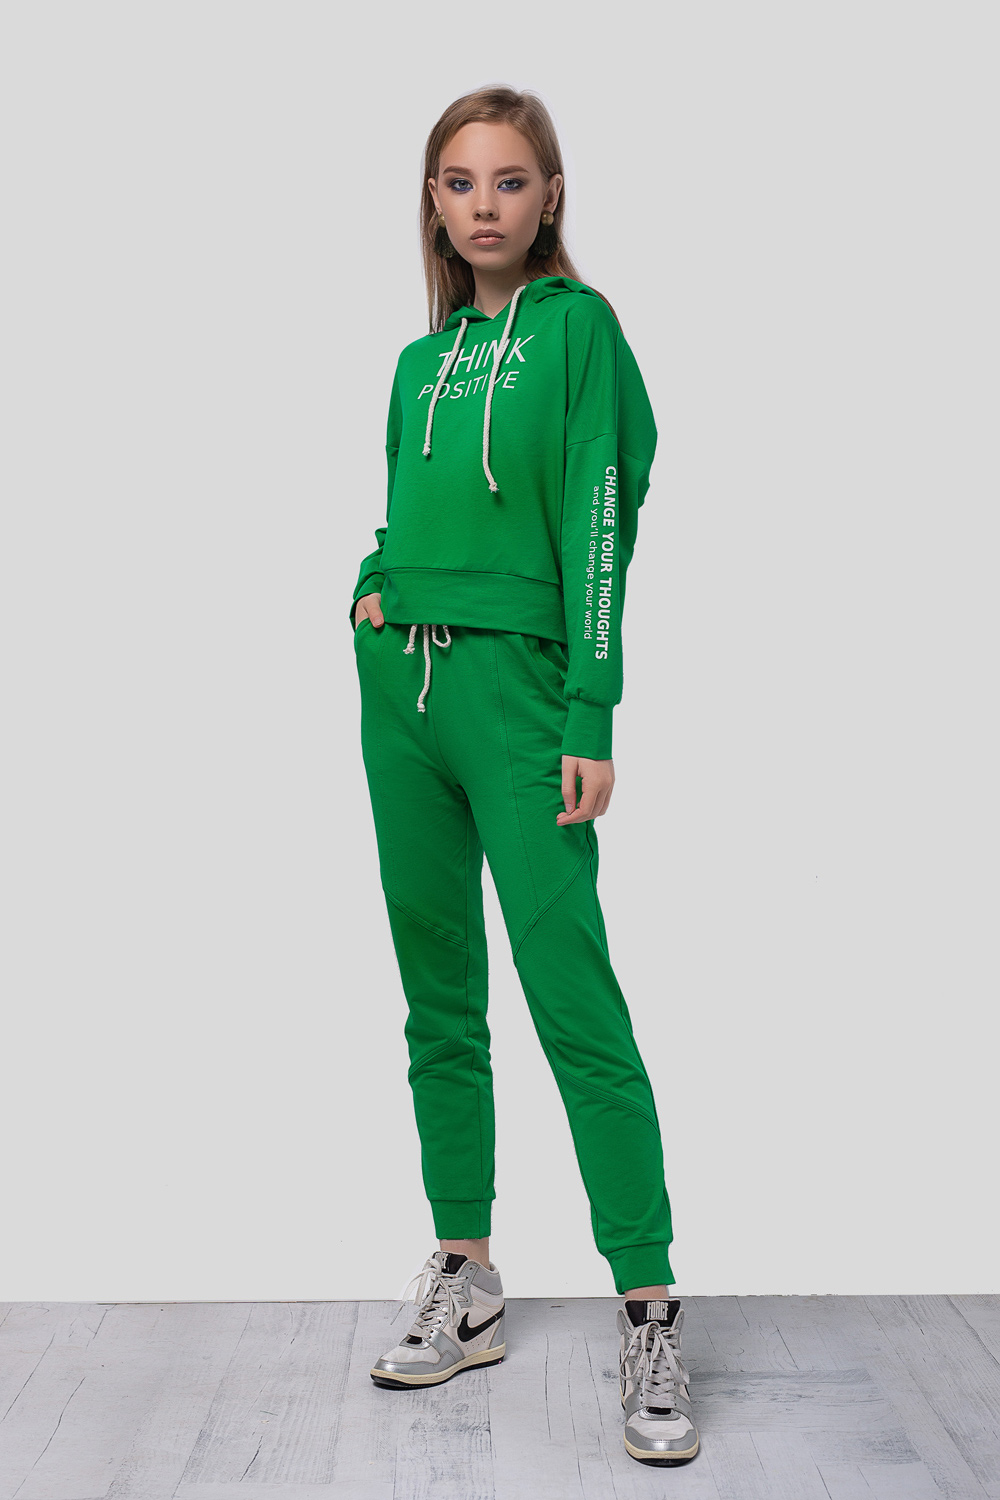 Green hoodie with a slogan